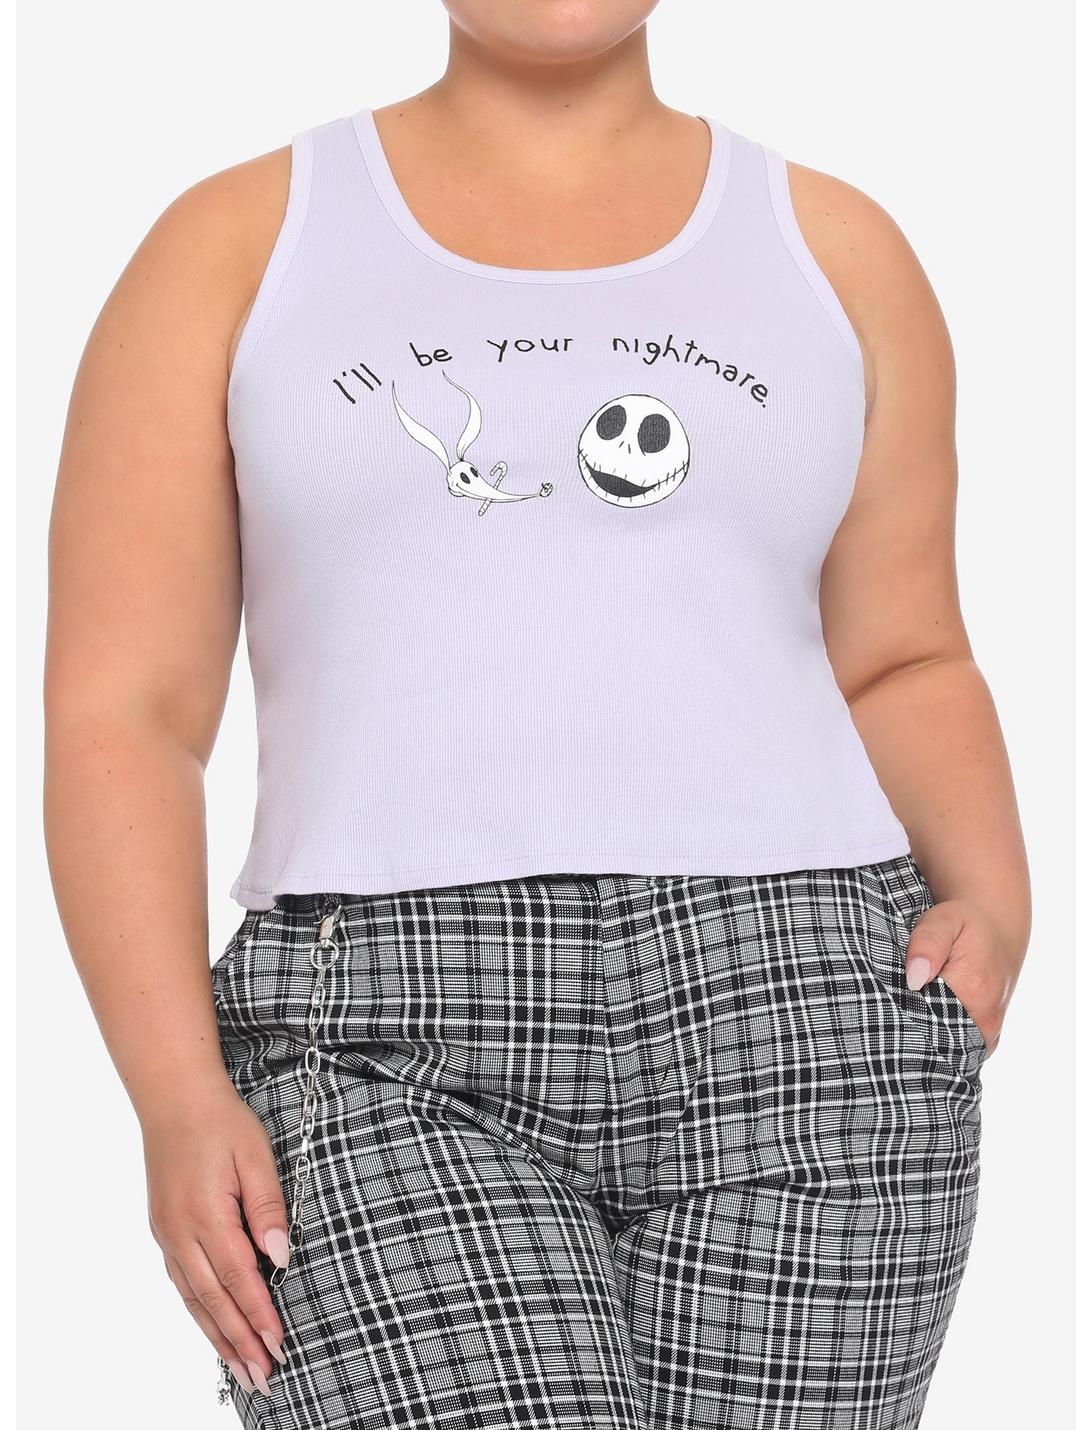 The Nightmare Before Christmas Be Your Nightmare Ribbed Girls Tank Top Plus Size, MULTI, hi-res